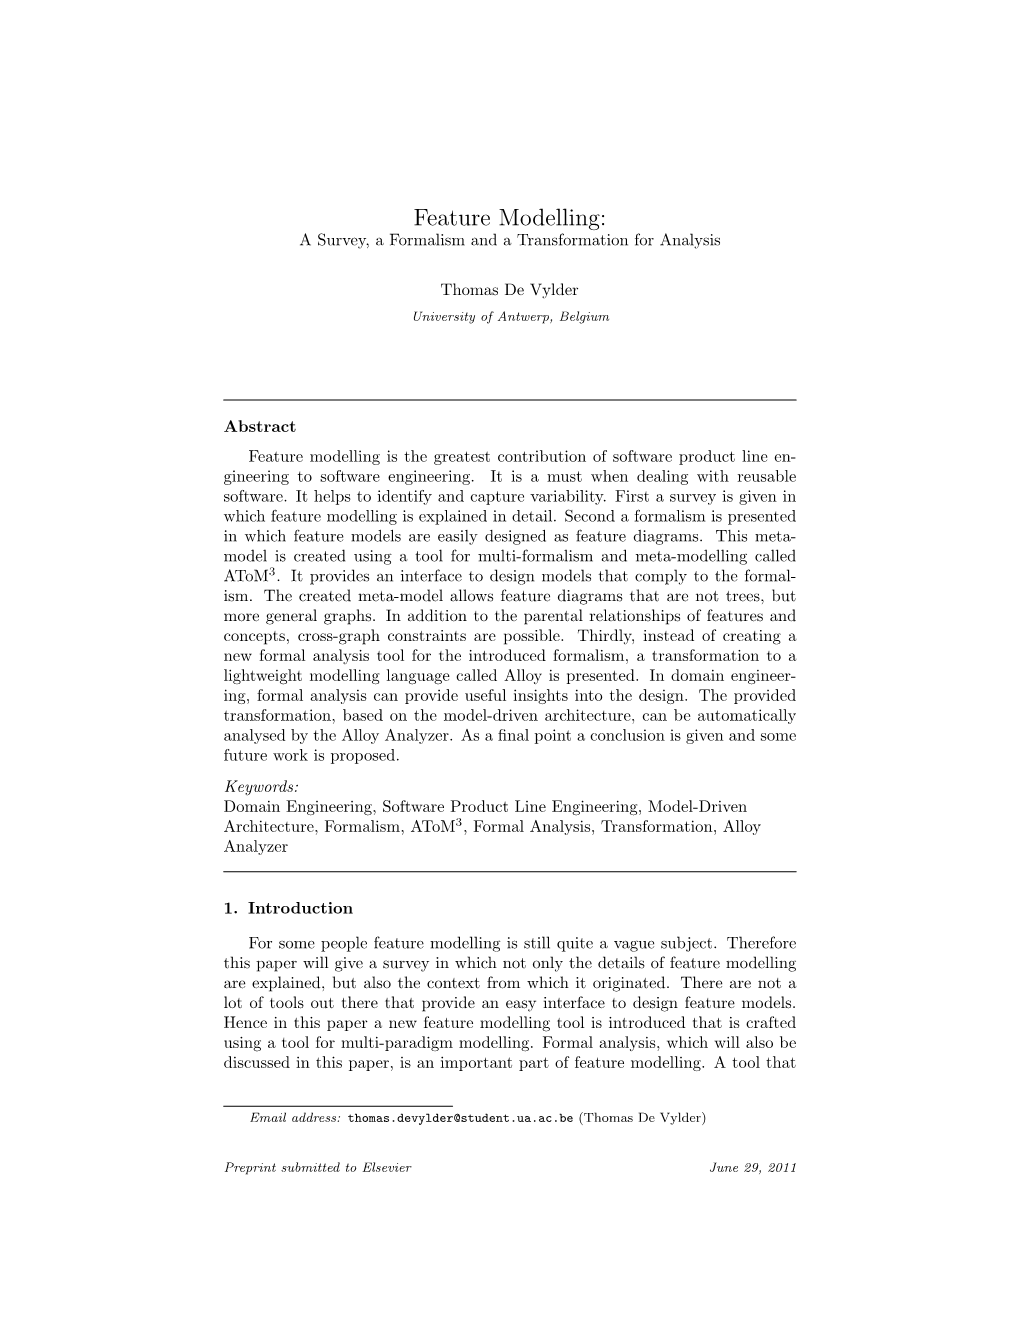 Feature Modelling: a Survey, a Formalism and a Transformation for Analysis